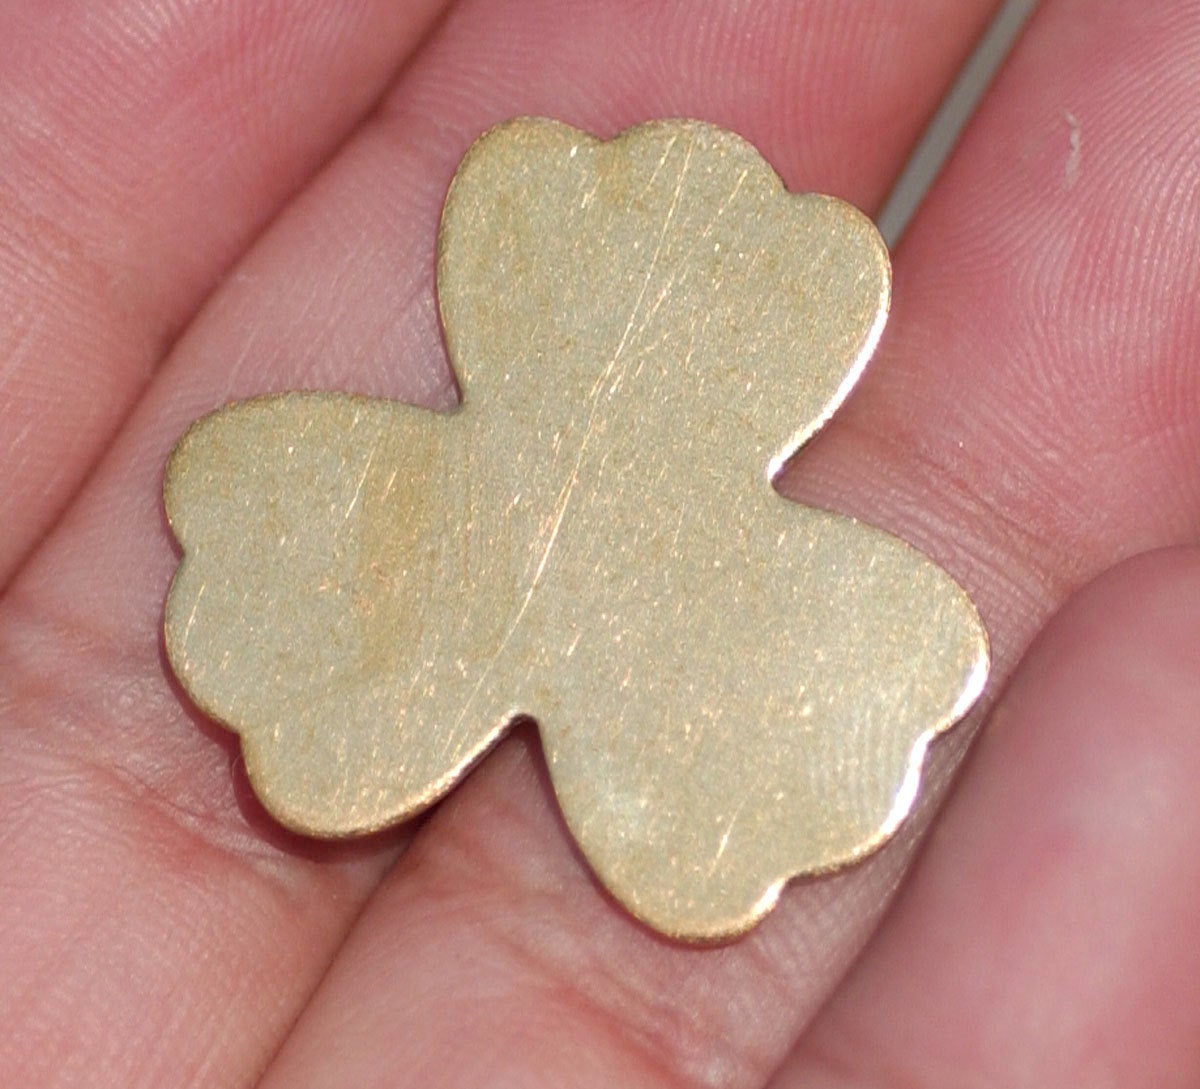 Clover flower shapes 24g 22g 20g copper, brass, bronze, nickel silver metal blanks for making jewelry